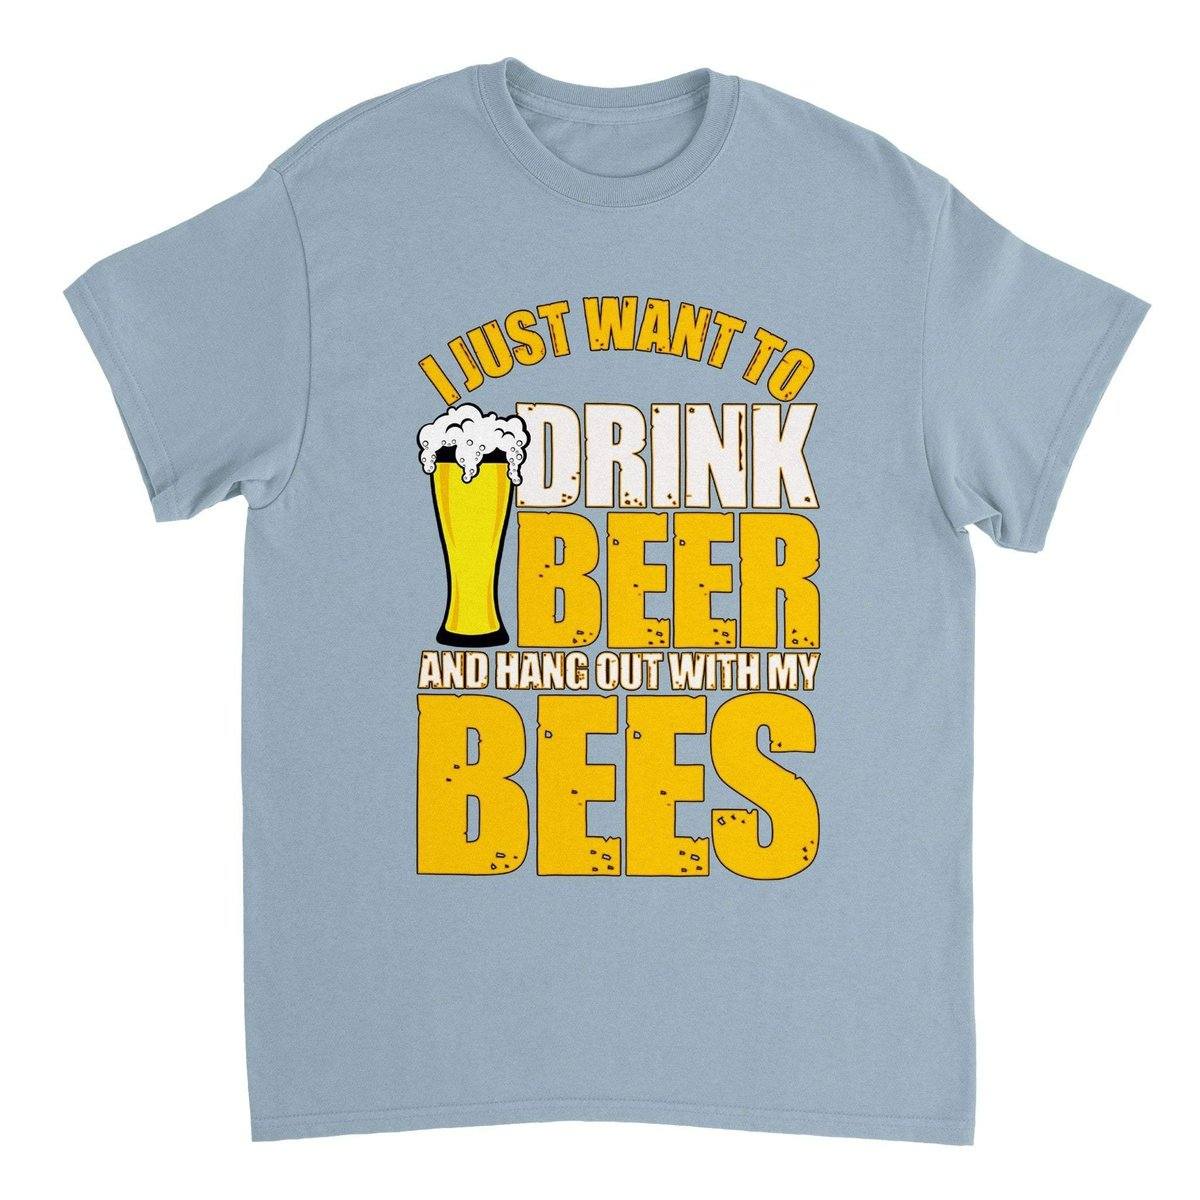 I Just Want To Drink Beer And Hang Out With My Bees T-Shirt - Funny Bee Beer Tshirt - Unisex Crewneck T-shirt Australia Online Color Light Blue / S